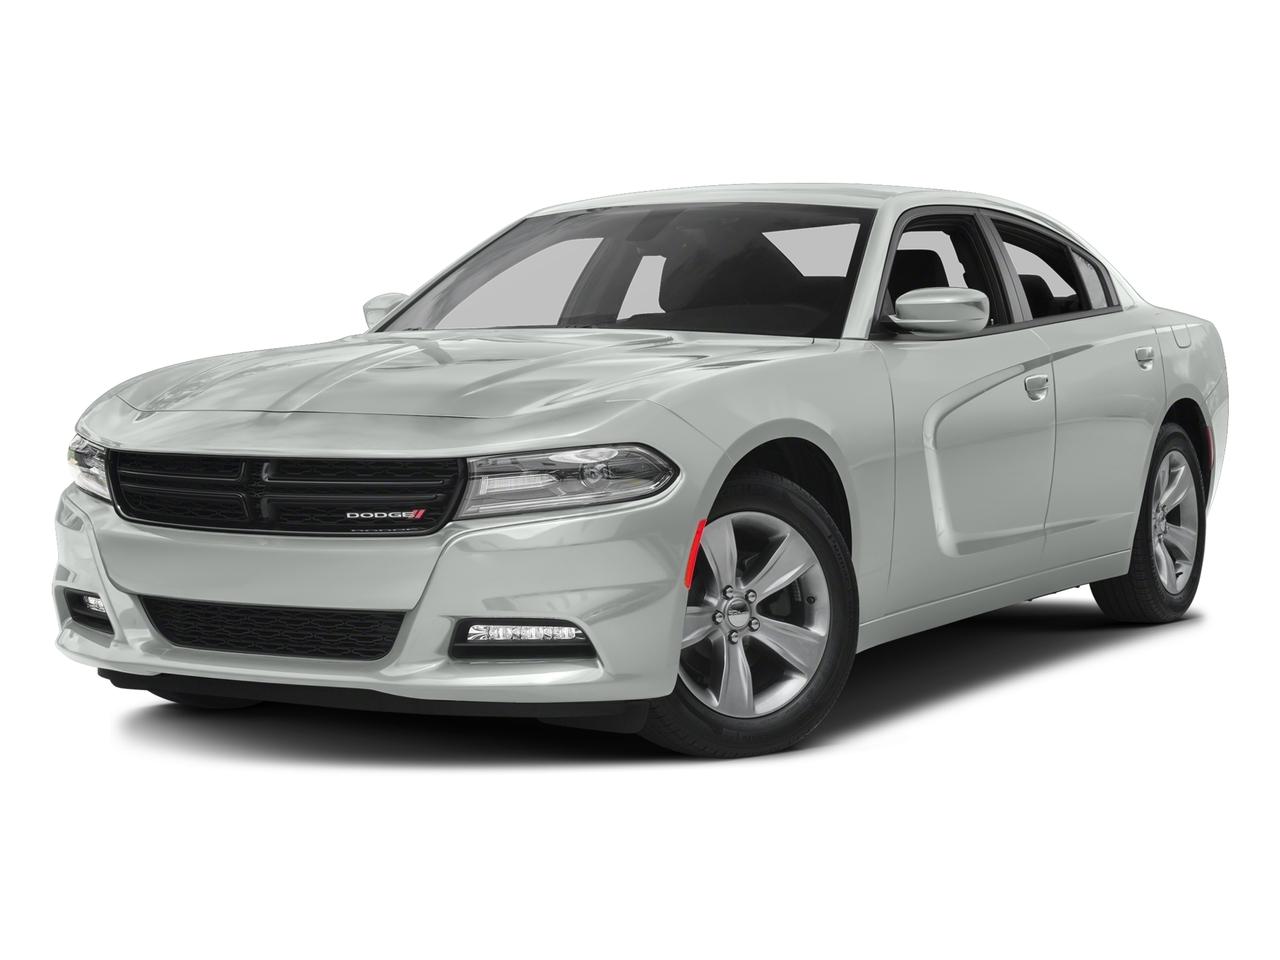 2016 Dodge Charger Vehicle Photo in Saint Charles, IL 60174